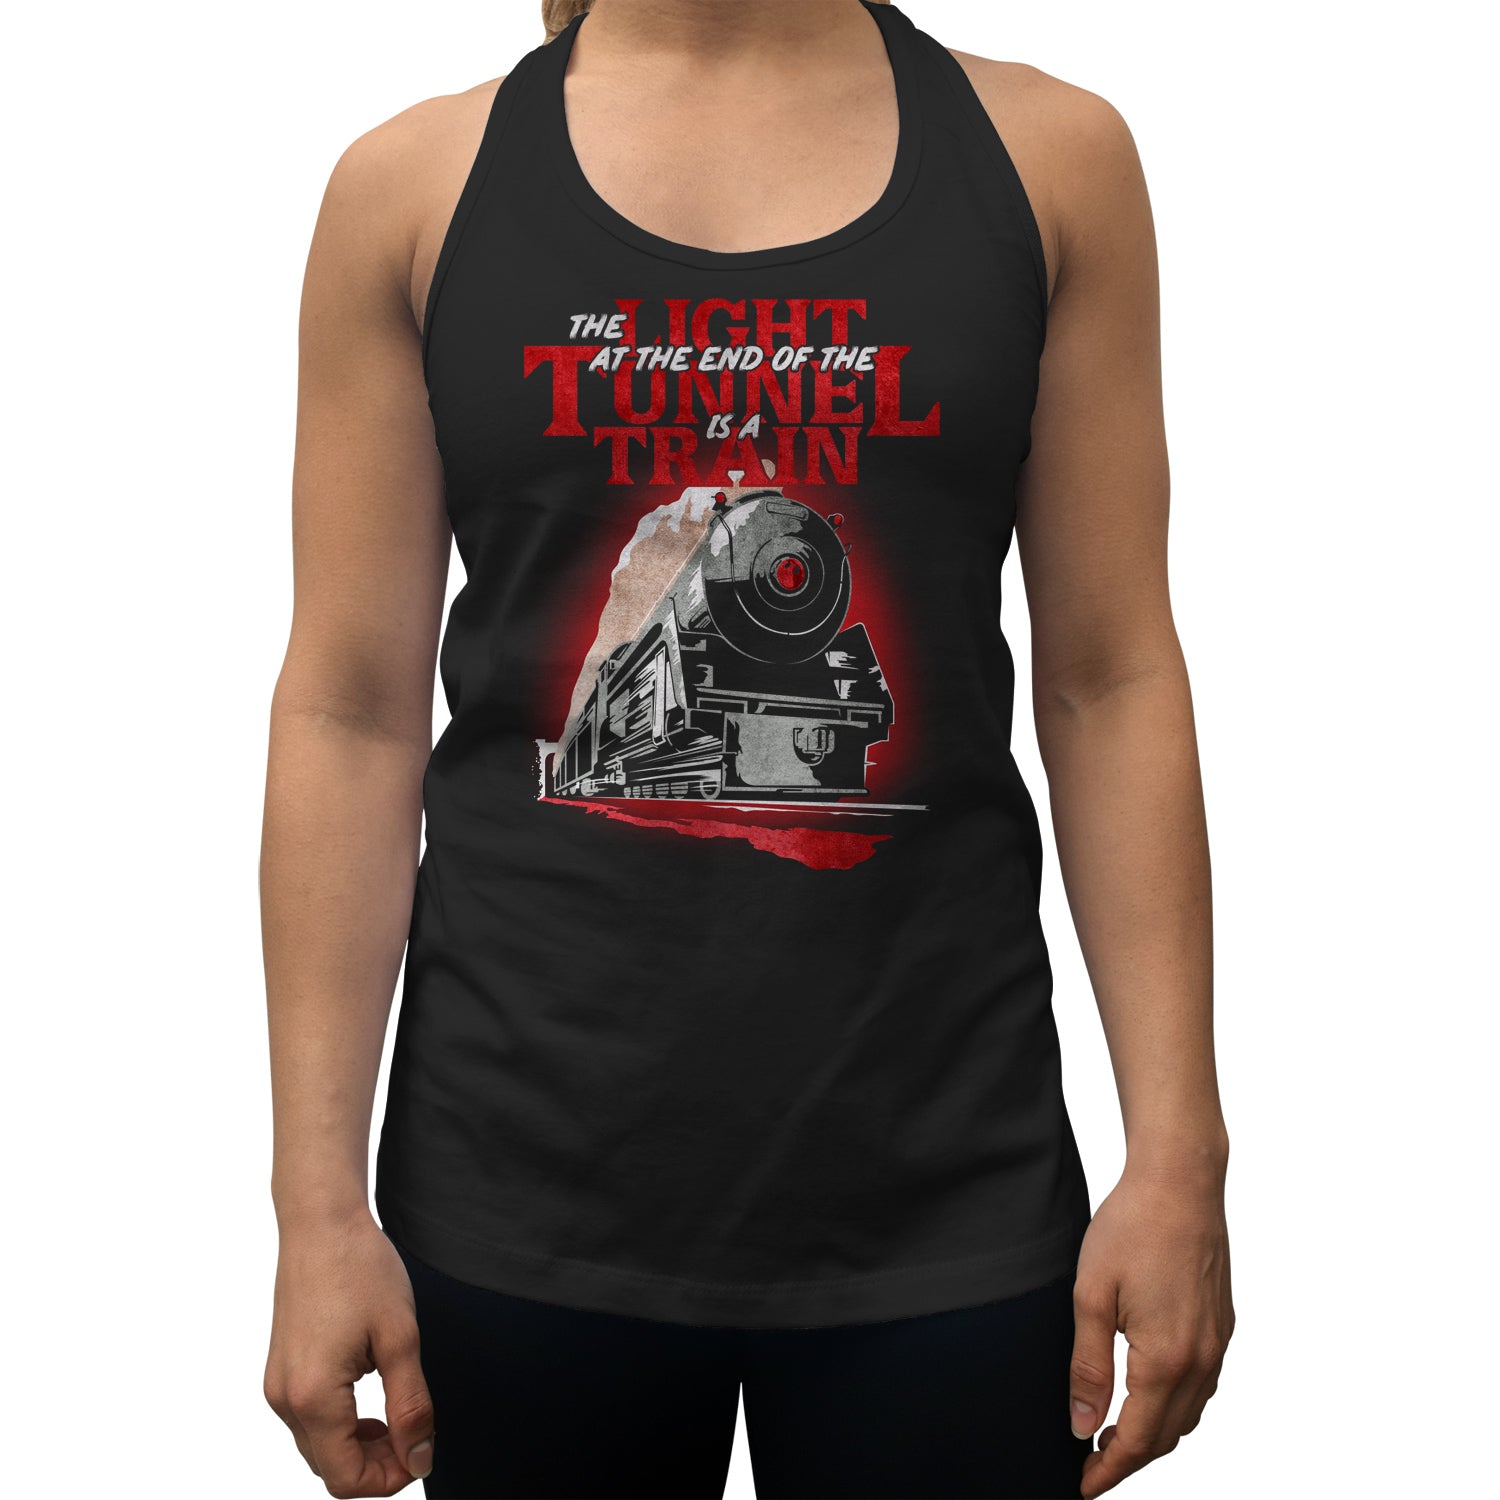 Women's The Light at The End of The Tunnel is a Train Racerback Tank Top